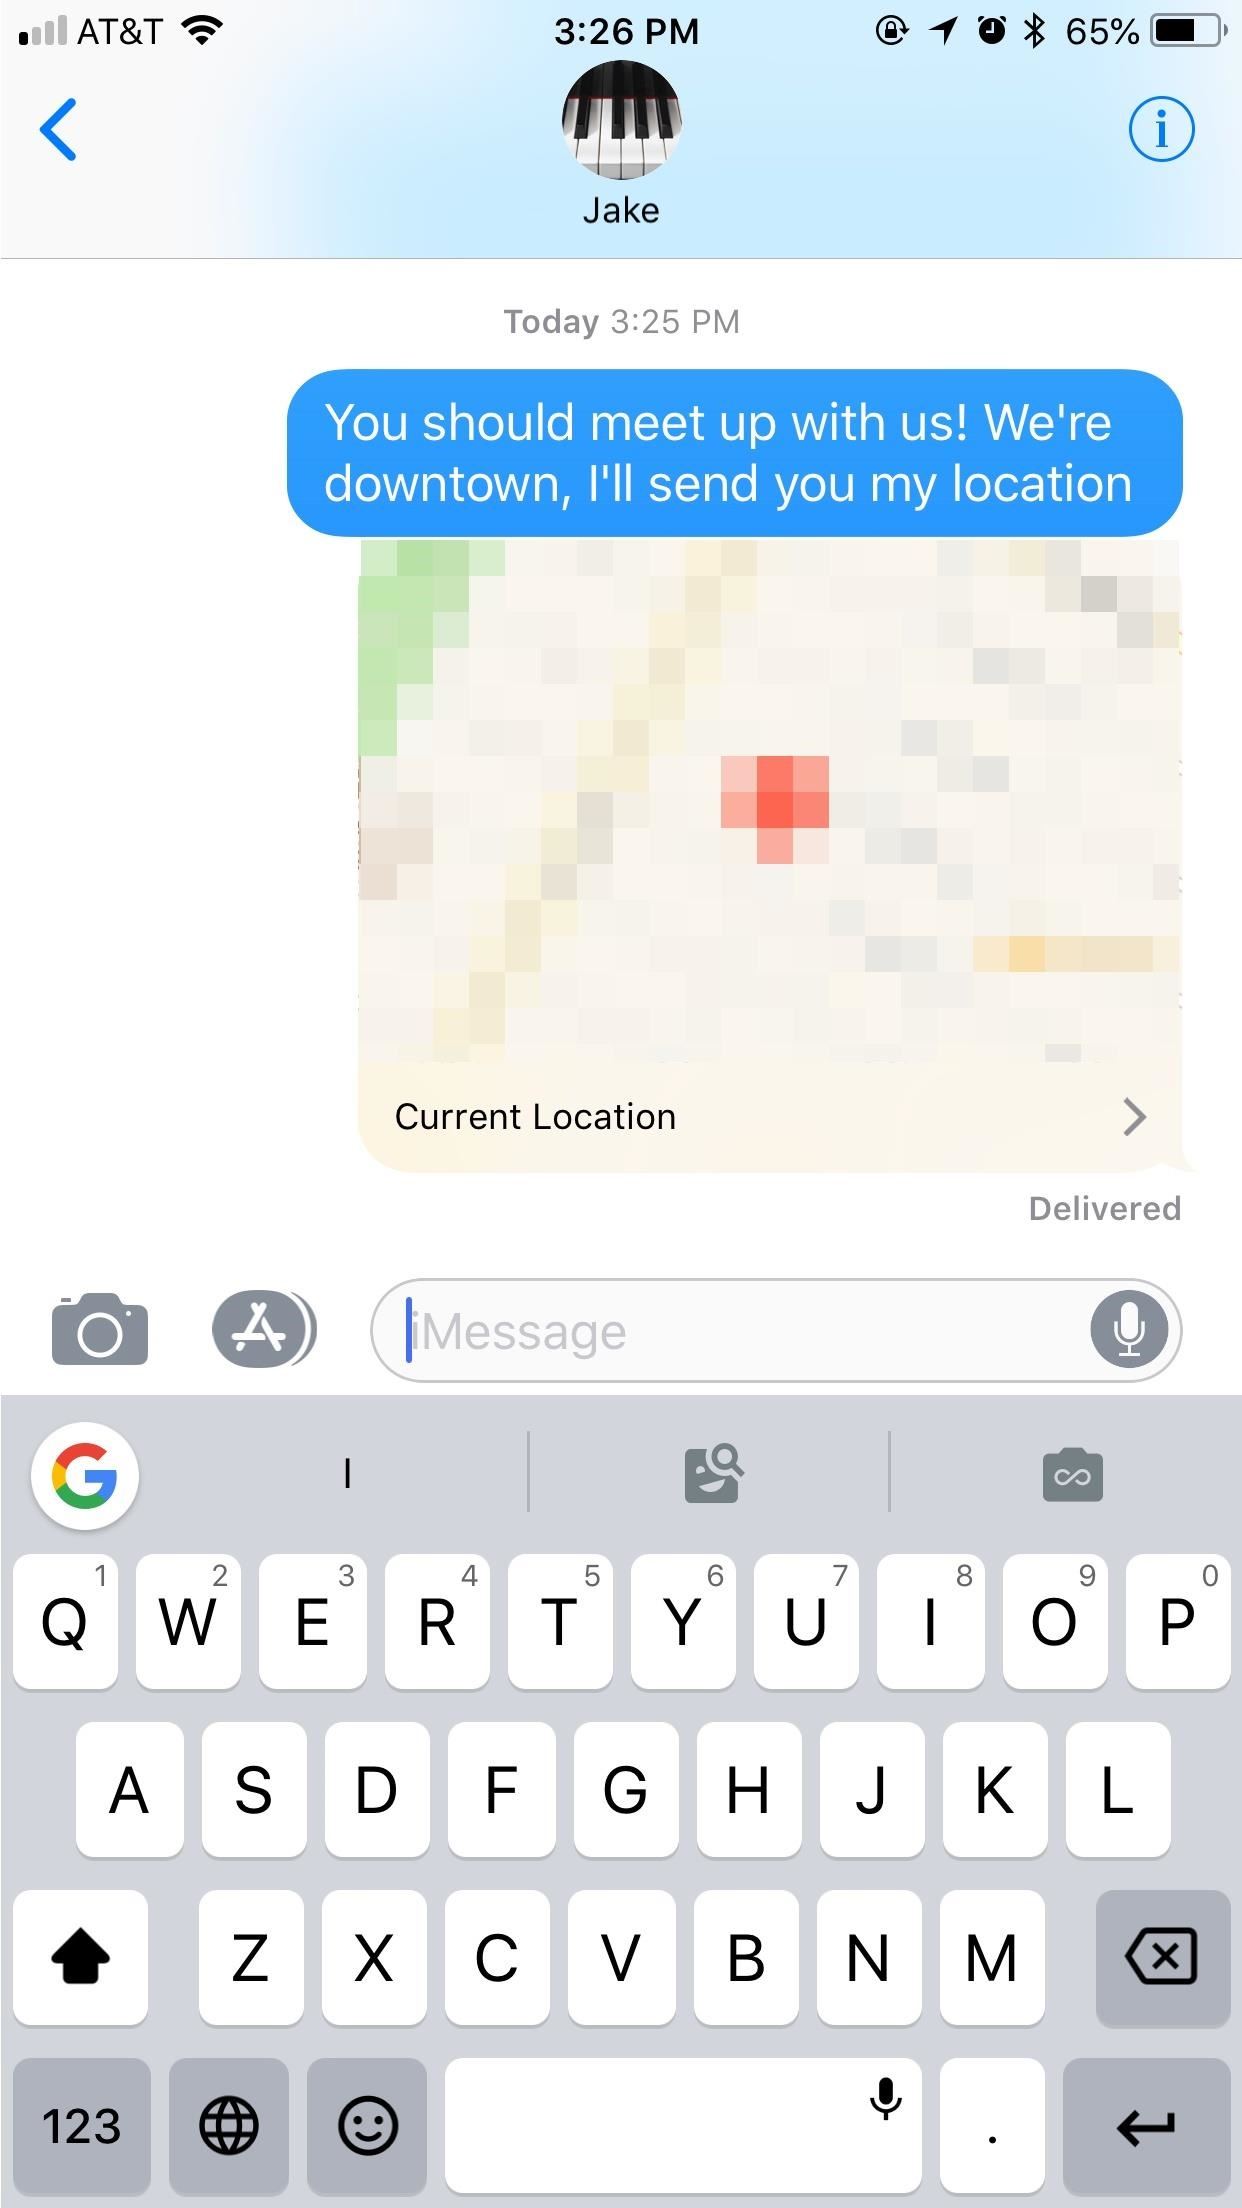 Messages 101: How to Send a Friend a Map to Your Current Location or Let Them Track You While Moving